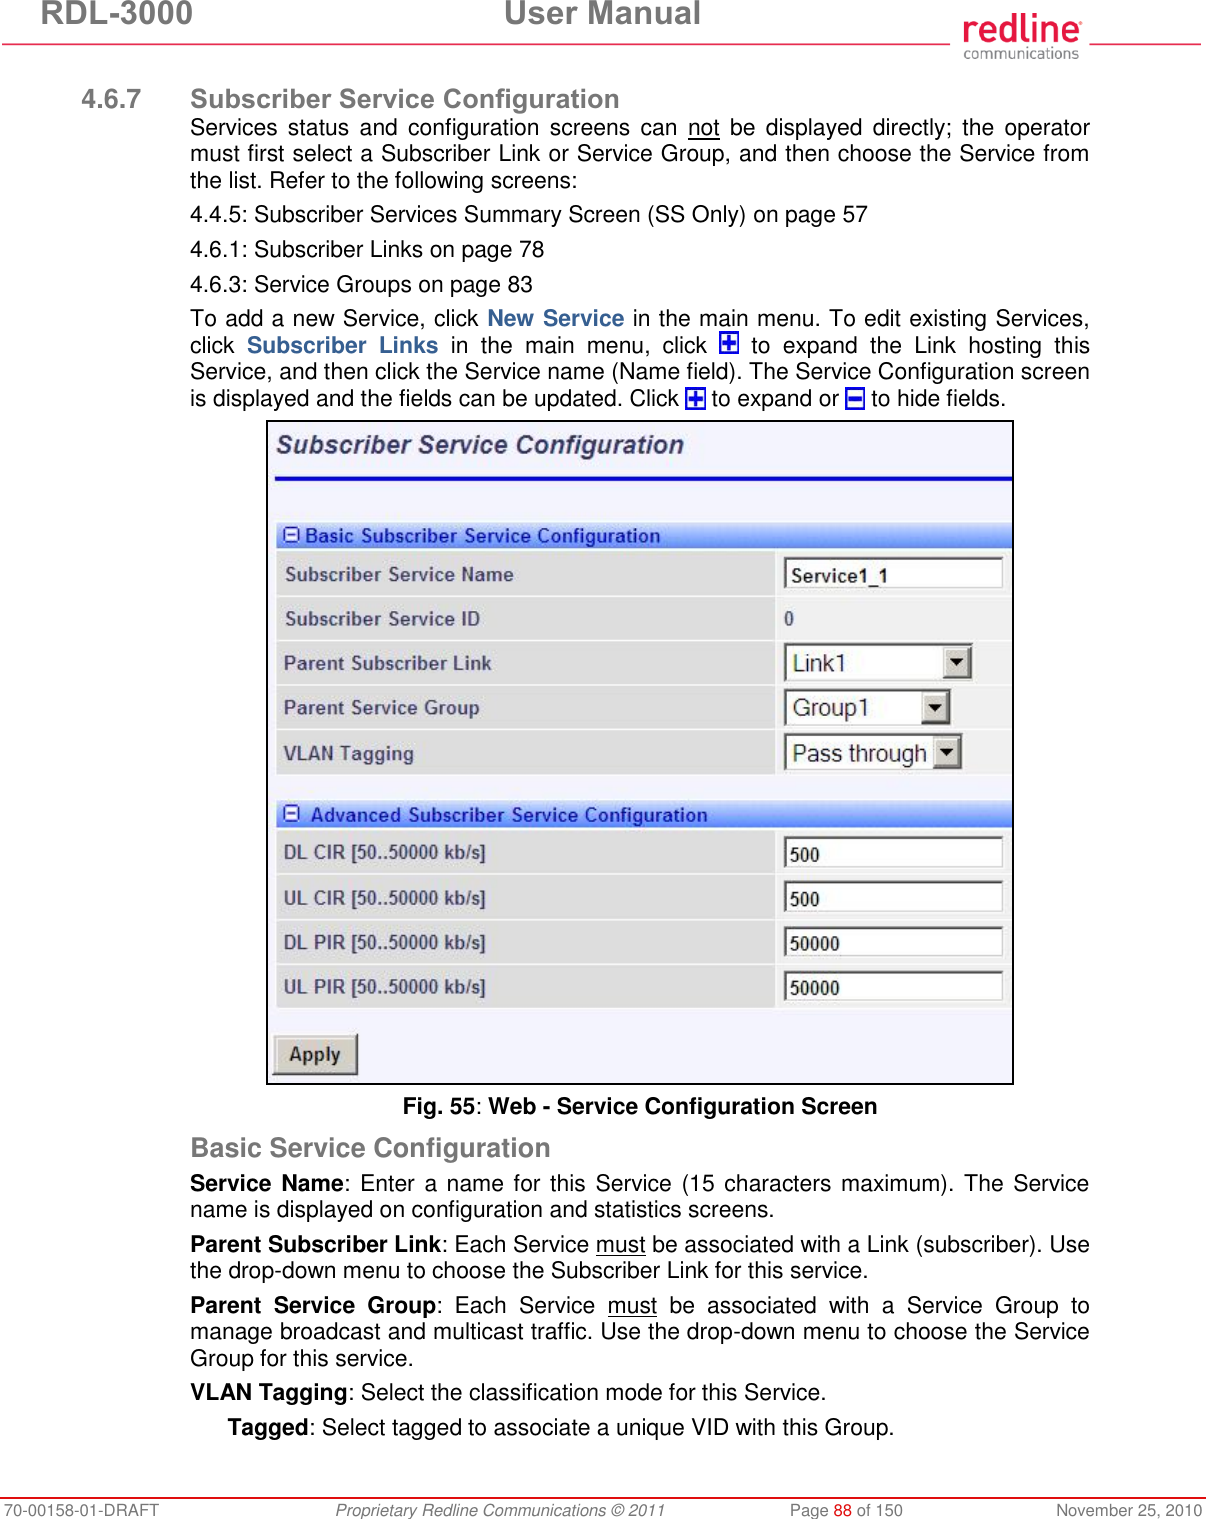 RDL-3000  User Manual 70-00158-01-DRAFT  Proprietary Redline Communications © 2011  Page 88 of 150  November 25, 2010  4.6.7 Subscriber Service Configuration Services status  and  configuration  screens  can  not be  displayed directly;  the  operator must first select a Subscriber Link or Service Group, and then choose the Service from the list. Refer to the following screens: 4.4.5: Subscriber Services Summary Screen (SS Only) on page 57 4.6.1: Subscriber Links on page 78 4.6.3: Service Groups on page 83 To add a new Service, click New Service in the main menu. To edit existing Services, click  Subscriber  Links  in  the  main  menu,  click    to  expand  the  Link  hosting  this Service, and then click the Service name (Name field). The Service Configuration screen is displayed and the fields can be updated. Click   to expand or   to hide fields.  Fig. 55: Web - Service Configuration Screen Basic Service Configuration Service Name:  Enter a name for this Service (15 characters maximum). The  Service name is displayed on configuration and statistics screens. Parent Subscriber Link: Each Service must be associated with a Link (subscriber). Use the drop-down menu to choose the Subscriber Link for this service. Parent  Service  Group:  Each  Service  must  be  associated  with  a  Service  Group  to manage broadcast and multicast traffic. Use the drop-down menu to choose the Service Group for this service. VLAN Tagging: Select the classification mode for this Service. Tagged: Select tagged to associate a unique VID with this Group. 